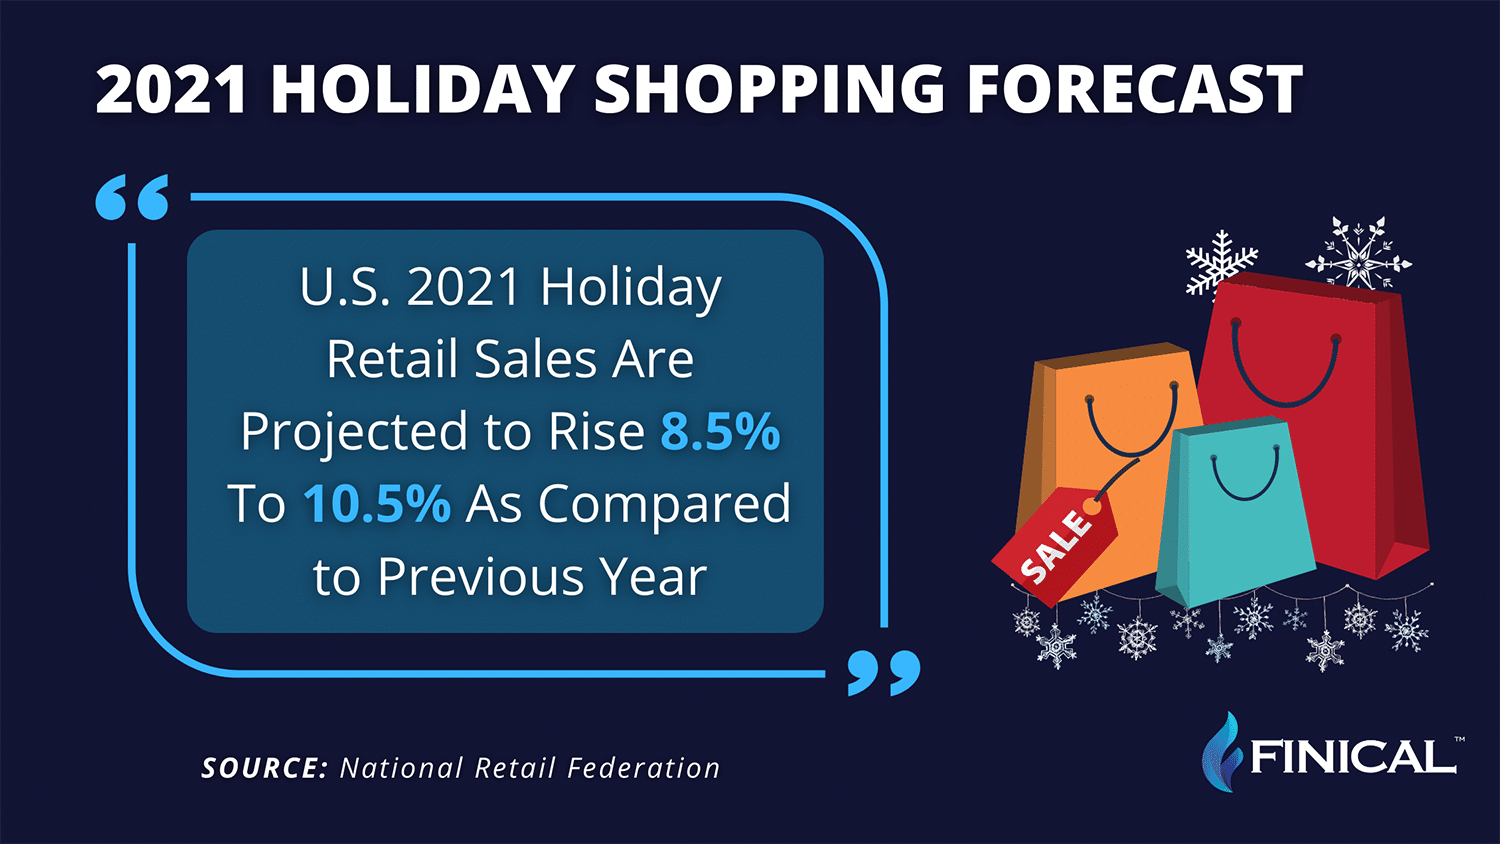 Holiday retail sales are projected to rise